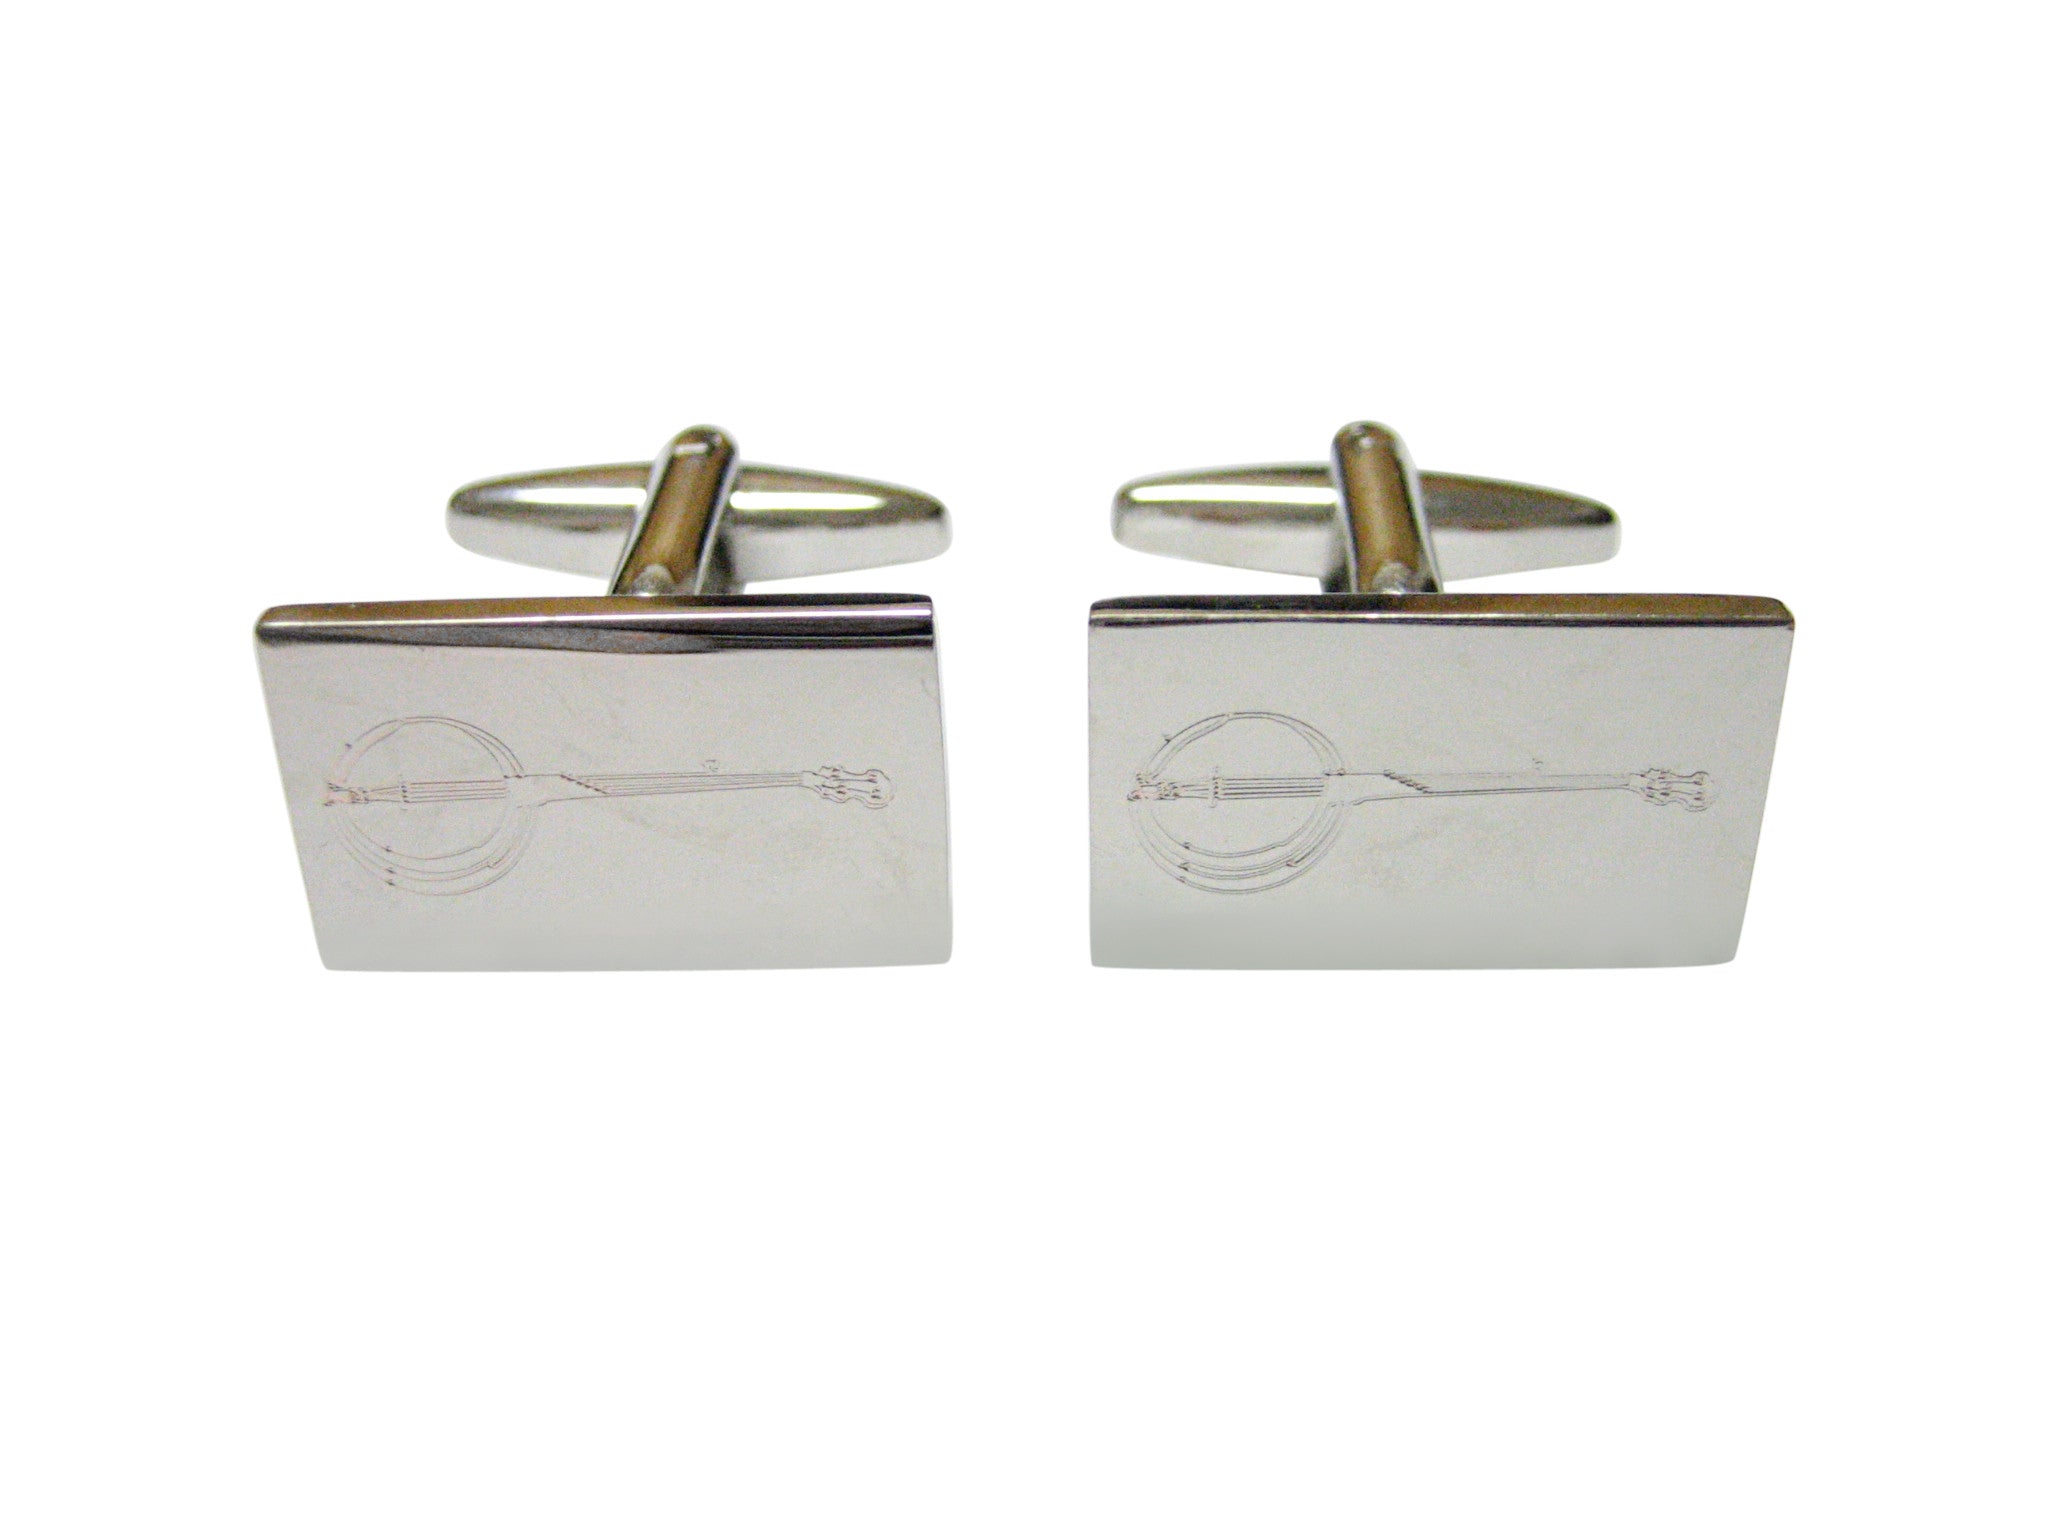 Silver Toned Etched Banjo Music Instrument Cufflinks